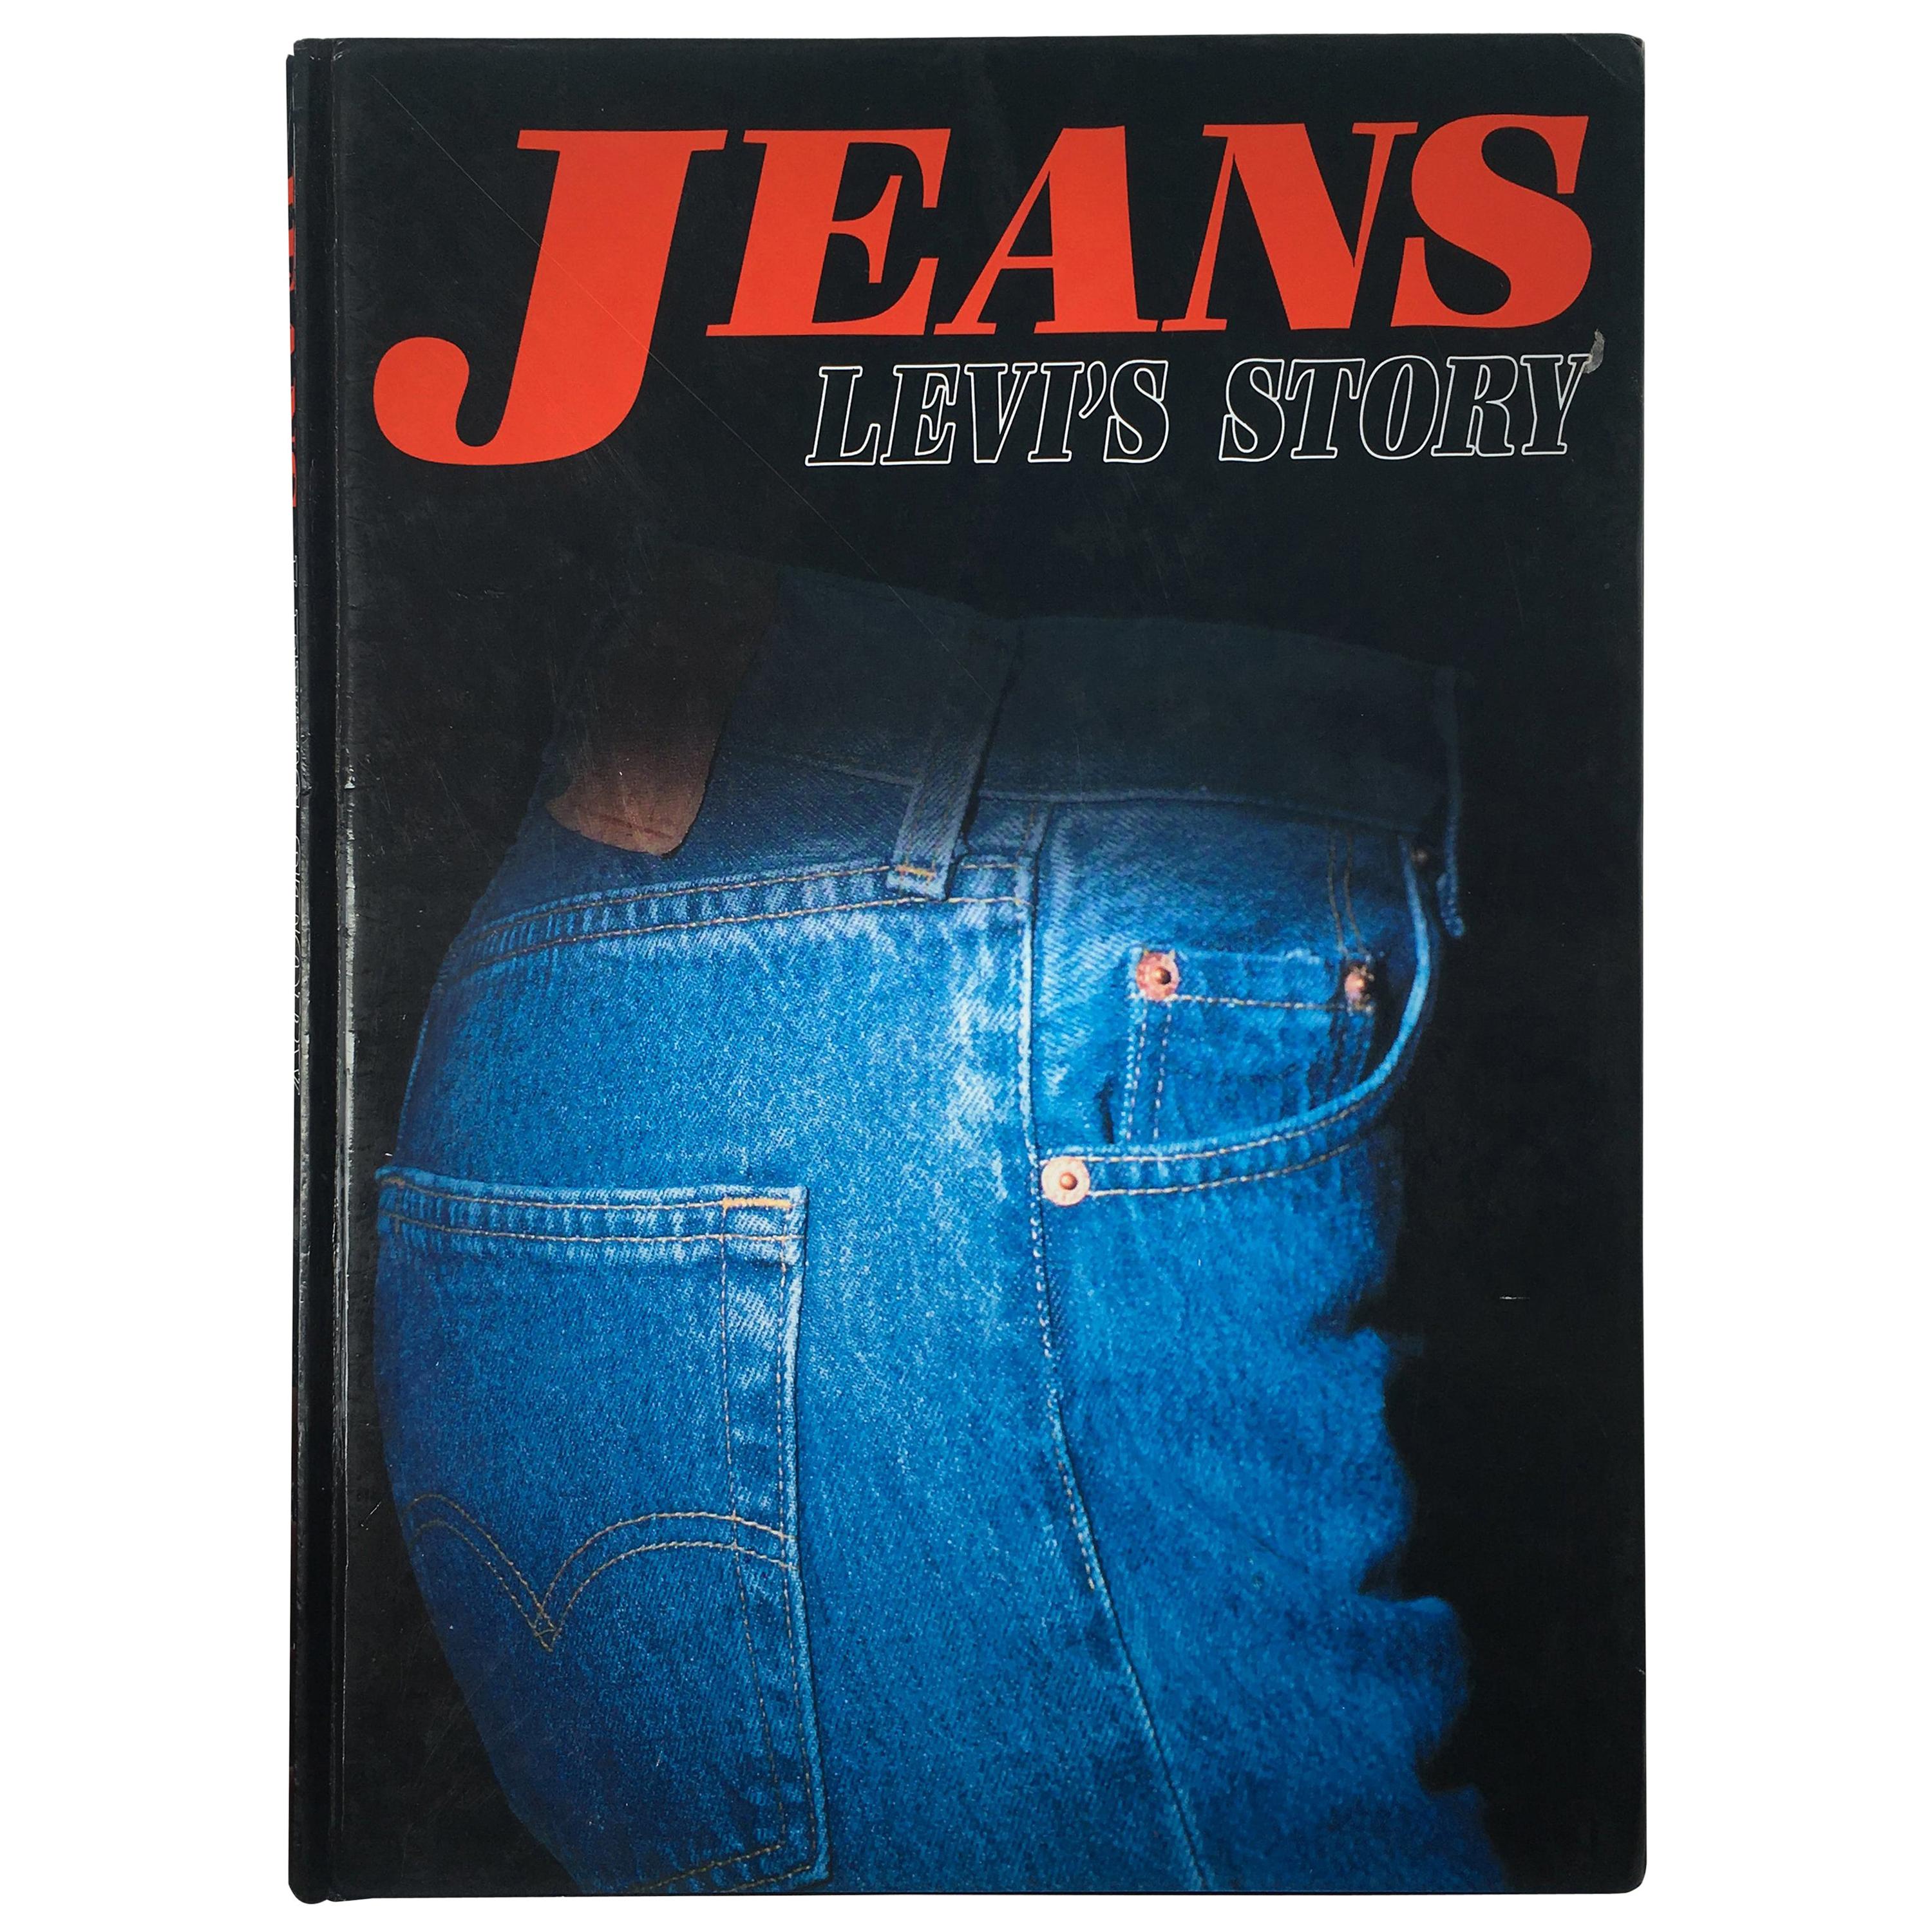 Jeans, Levi's Story 1st Edition 1990 For Sale